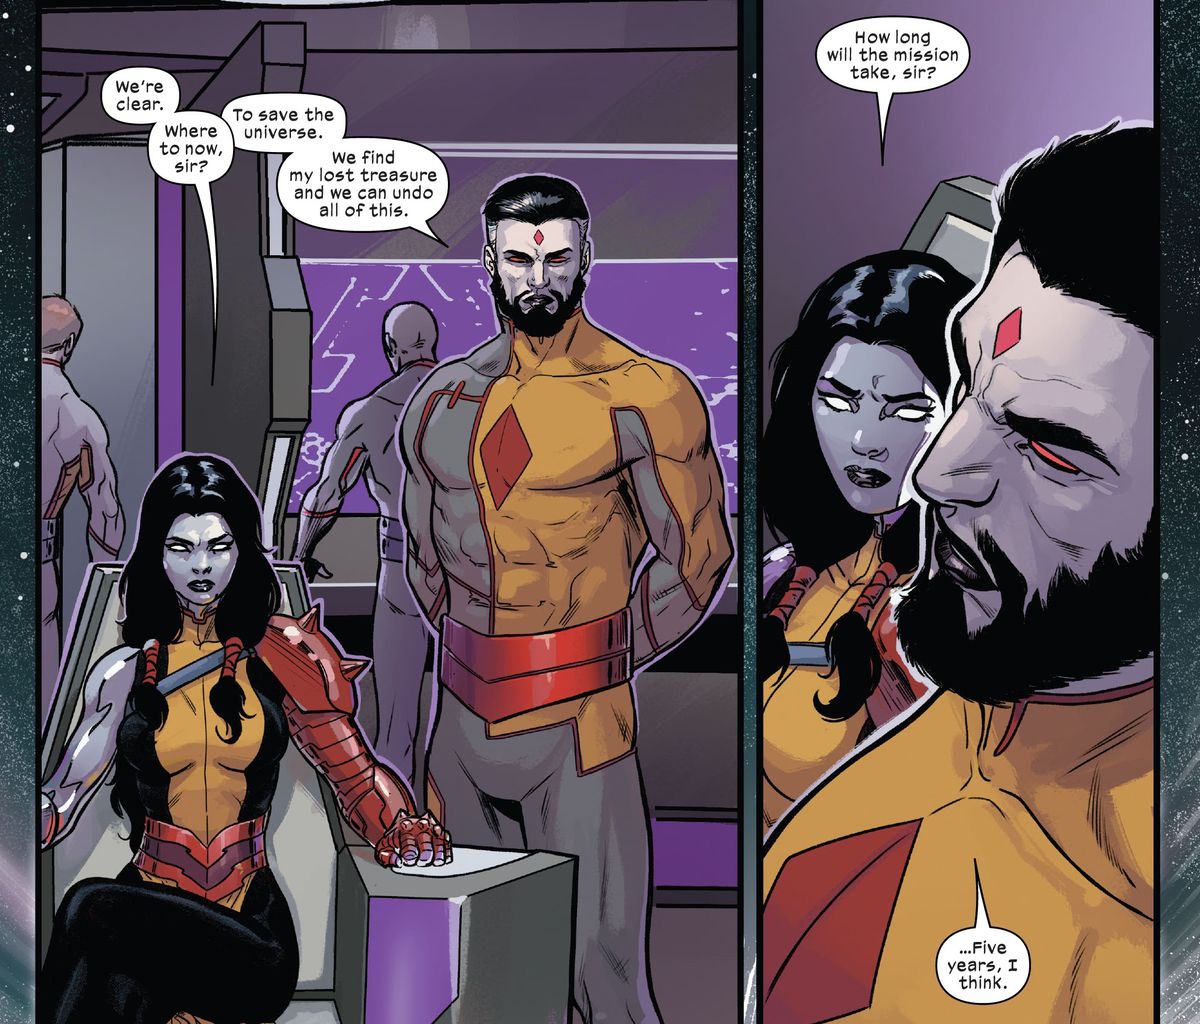 “Where to now, sir?” Rasputin says from the captain’s chair of a starship. “To save the universe,” answers Mister Sinister, saying that it’ll only take “Five years. I think,” in Immoral X-Men #2. 